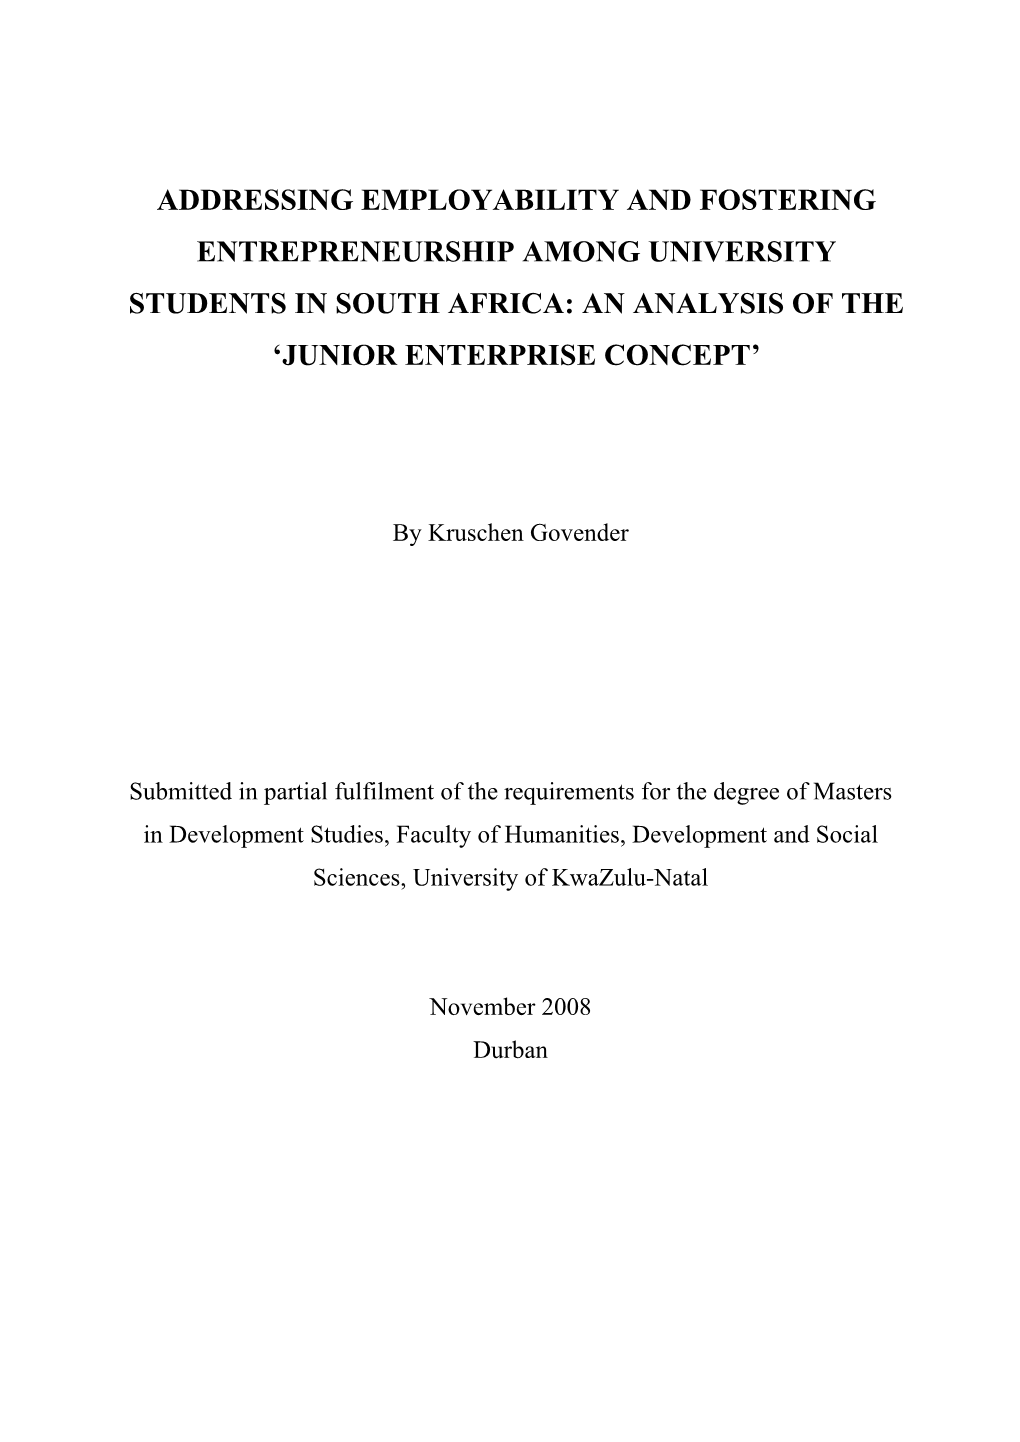 Addressing Employability and Fostering Entrepreneurship Among University Students in South Africa: an Analysis of the ‘Junior Enterprise Concept’